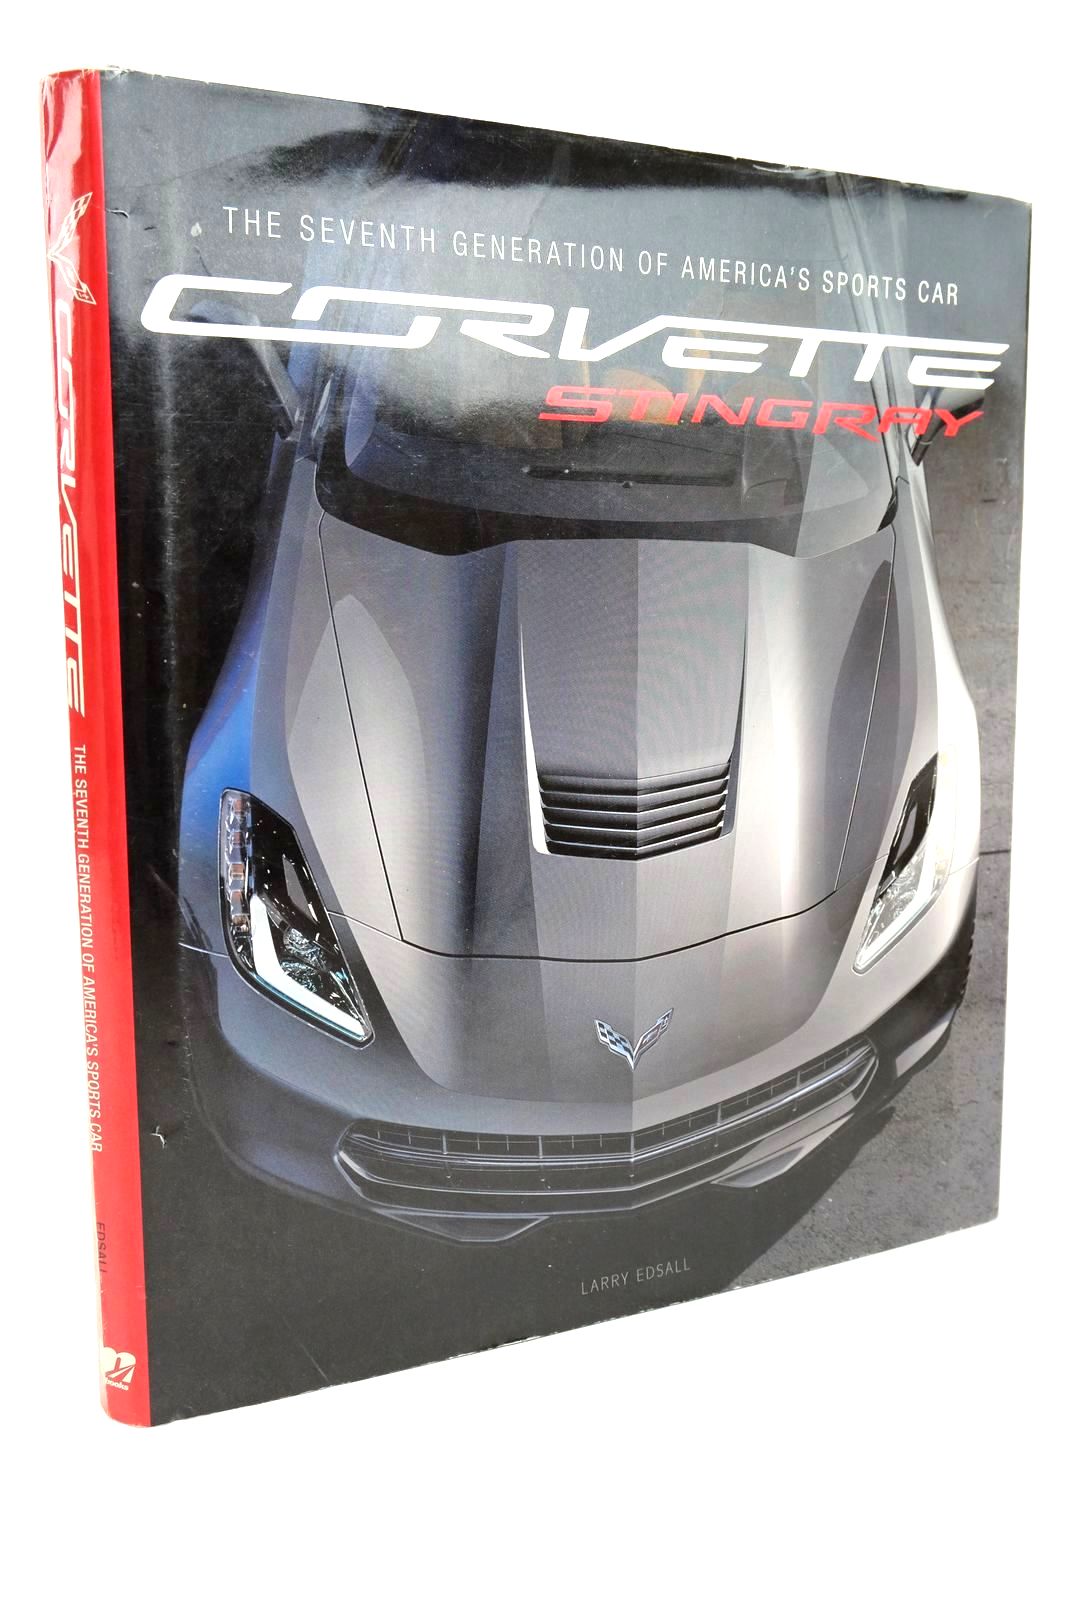 Photo of CORVETTE STINGRAY - THE SEVENTH GENERATION OF AMERICA'S SPORTS CAR written by Edsall, Larry published by Motorbooks (STOCK CODE: 1321226)  for sale by Stella & Rose's Books